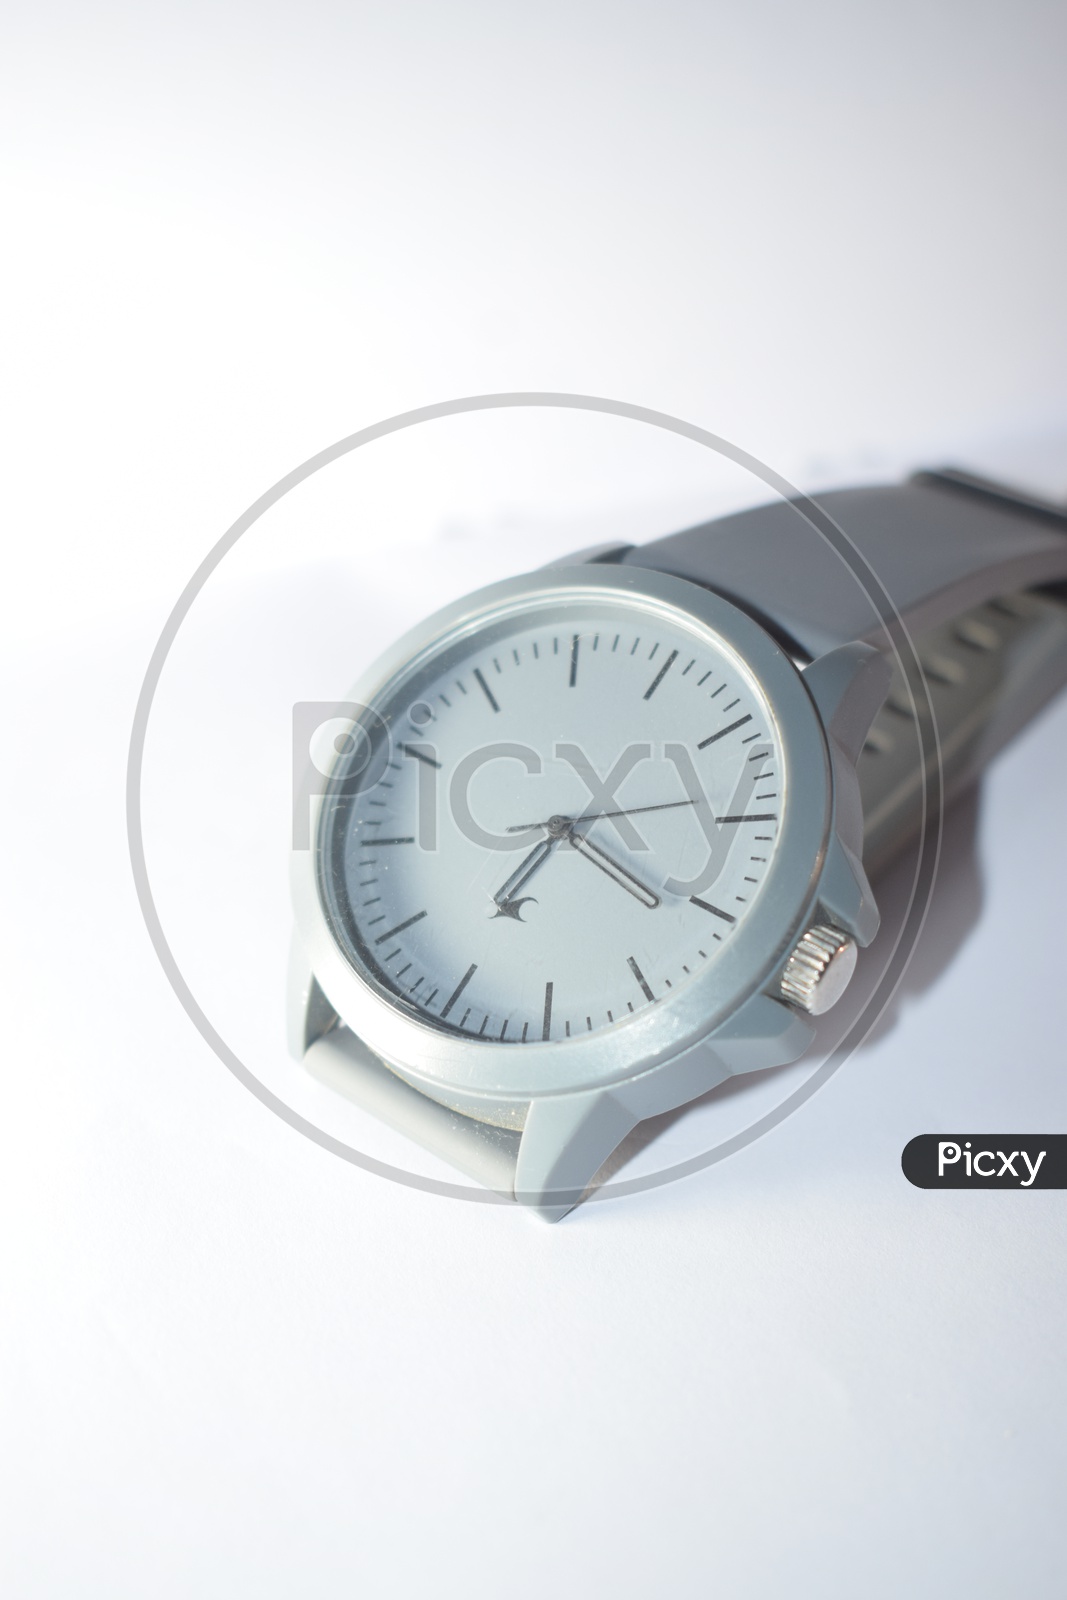 The Fastrack watch